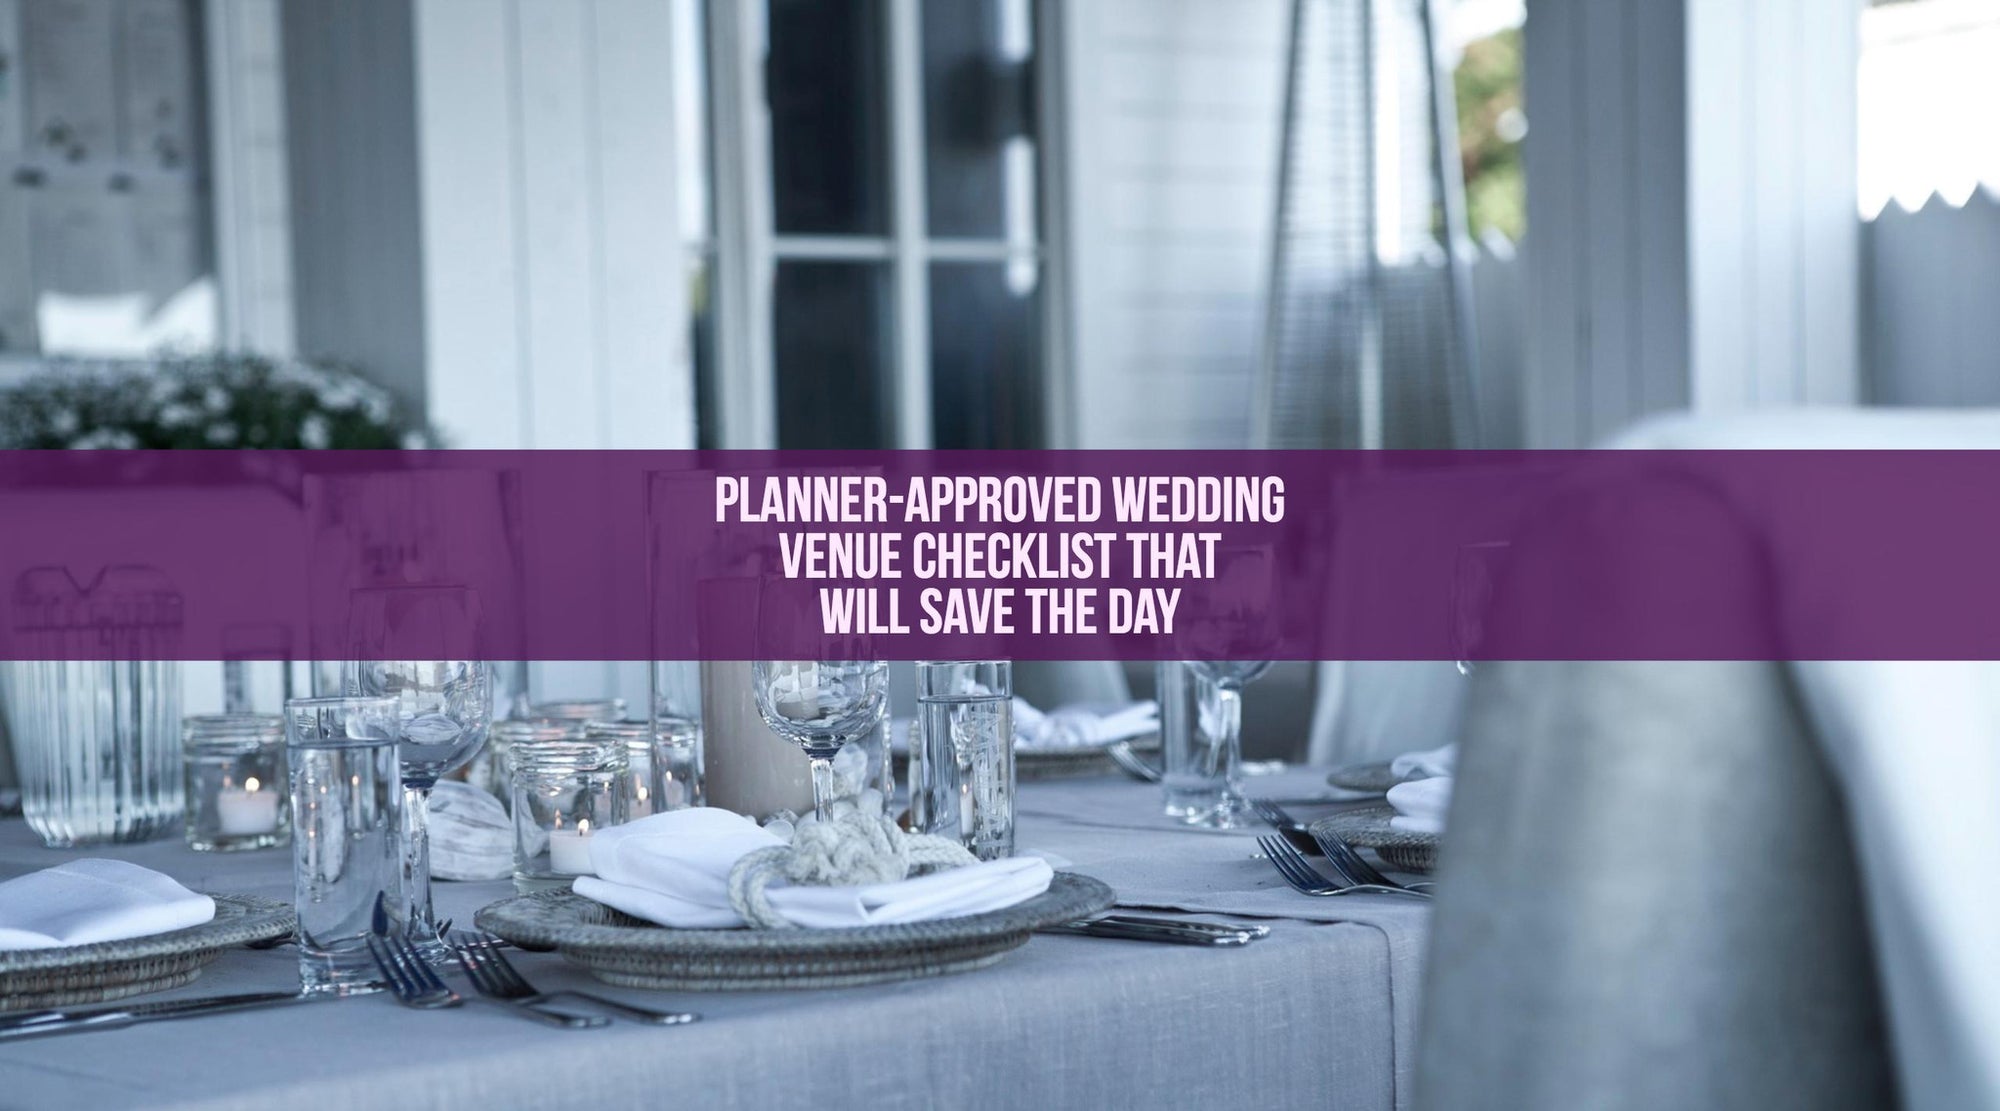 Planner-Approved Wedding Venue Checklist that Will Save the Day